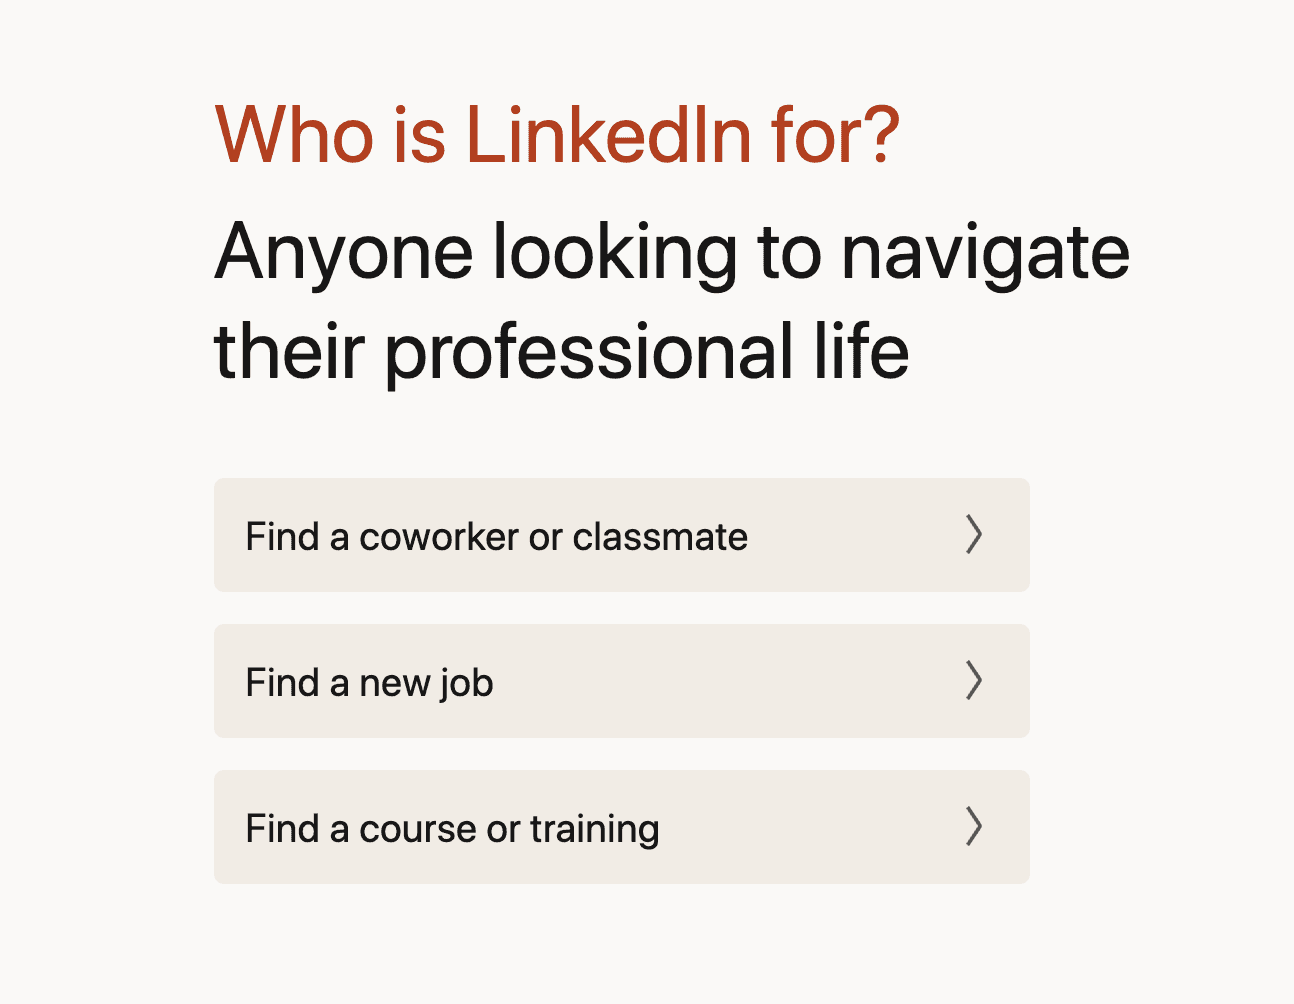 Who is LinkedIn for?